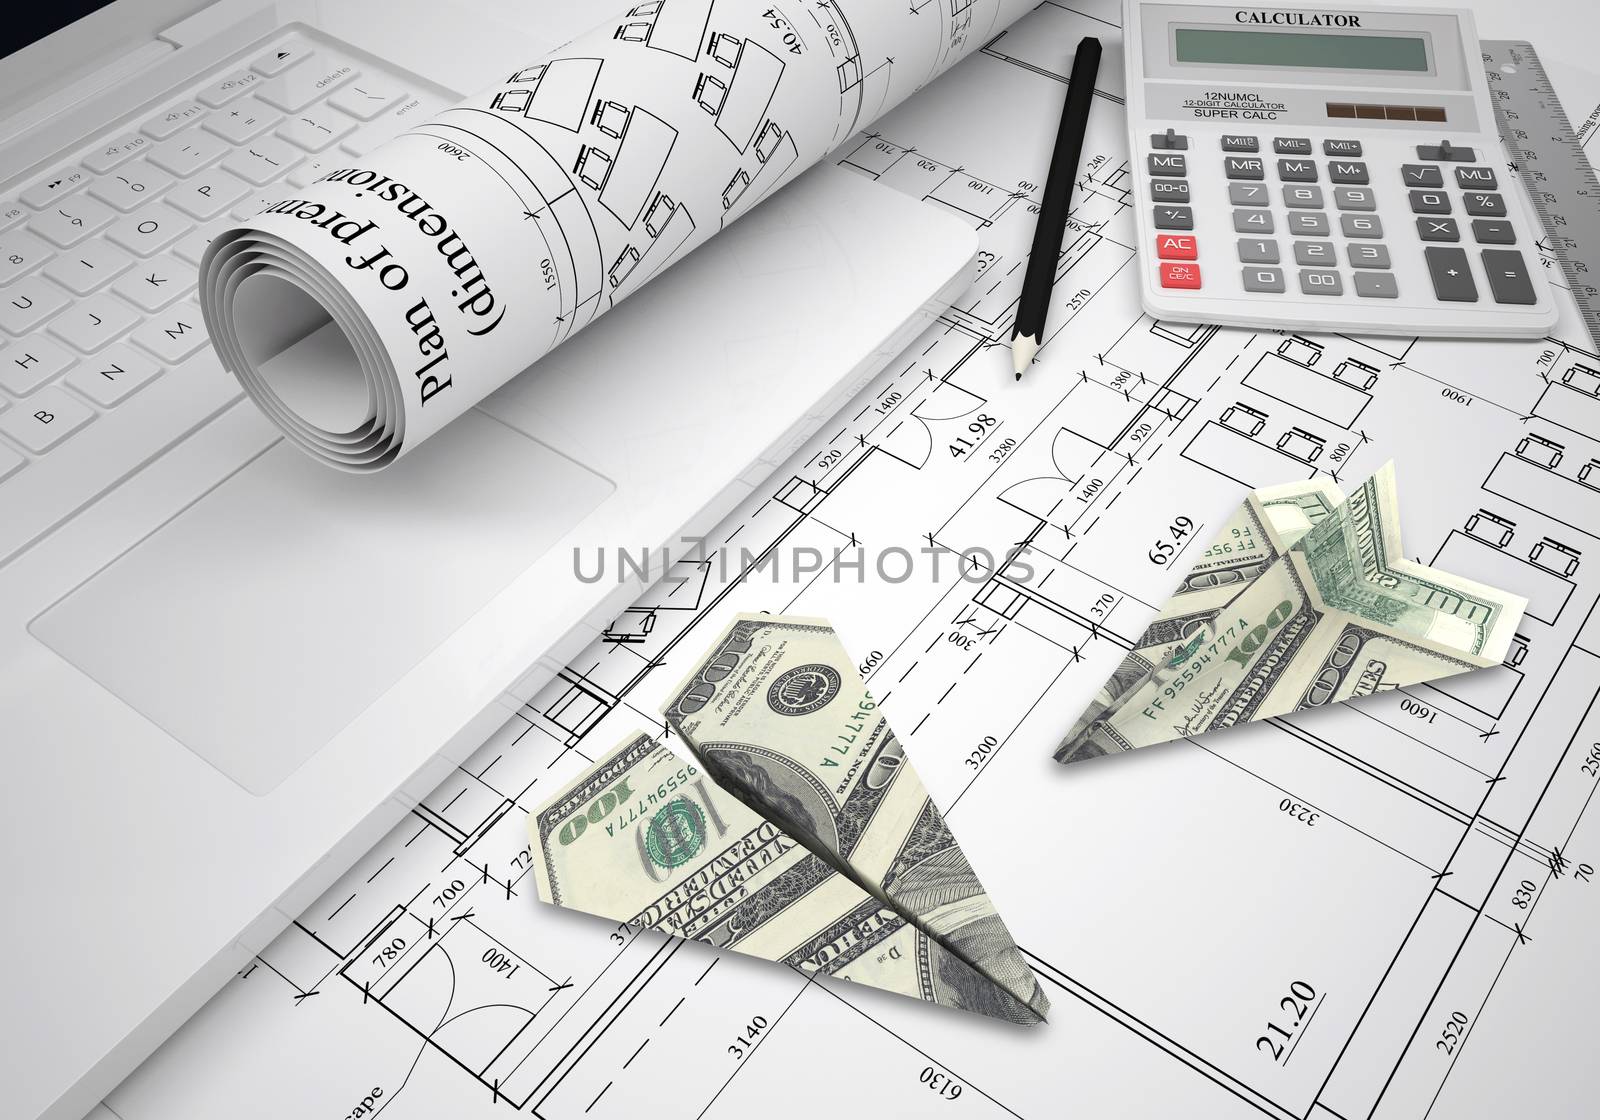 Paper airplanes of dollars lying on architectural drawings. Laptop and tools are close by. Concept of building business